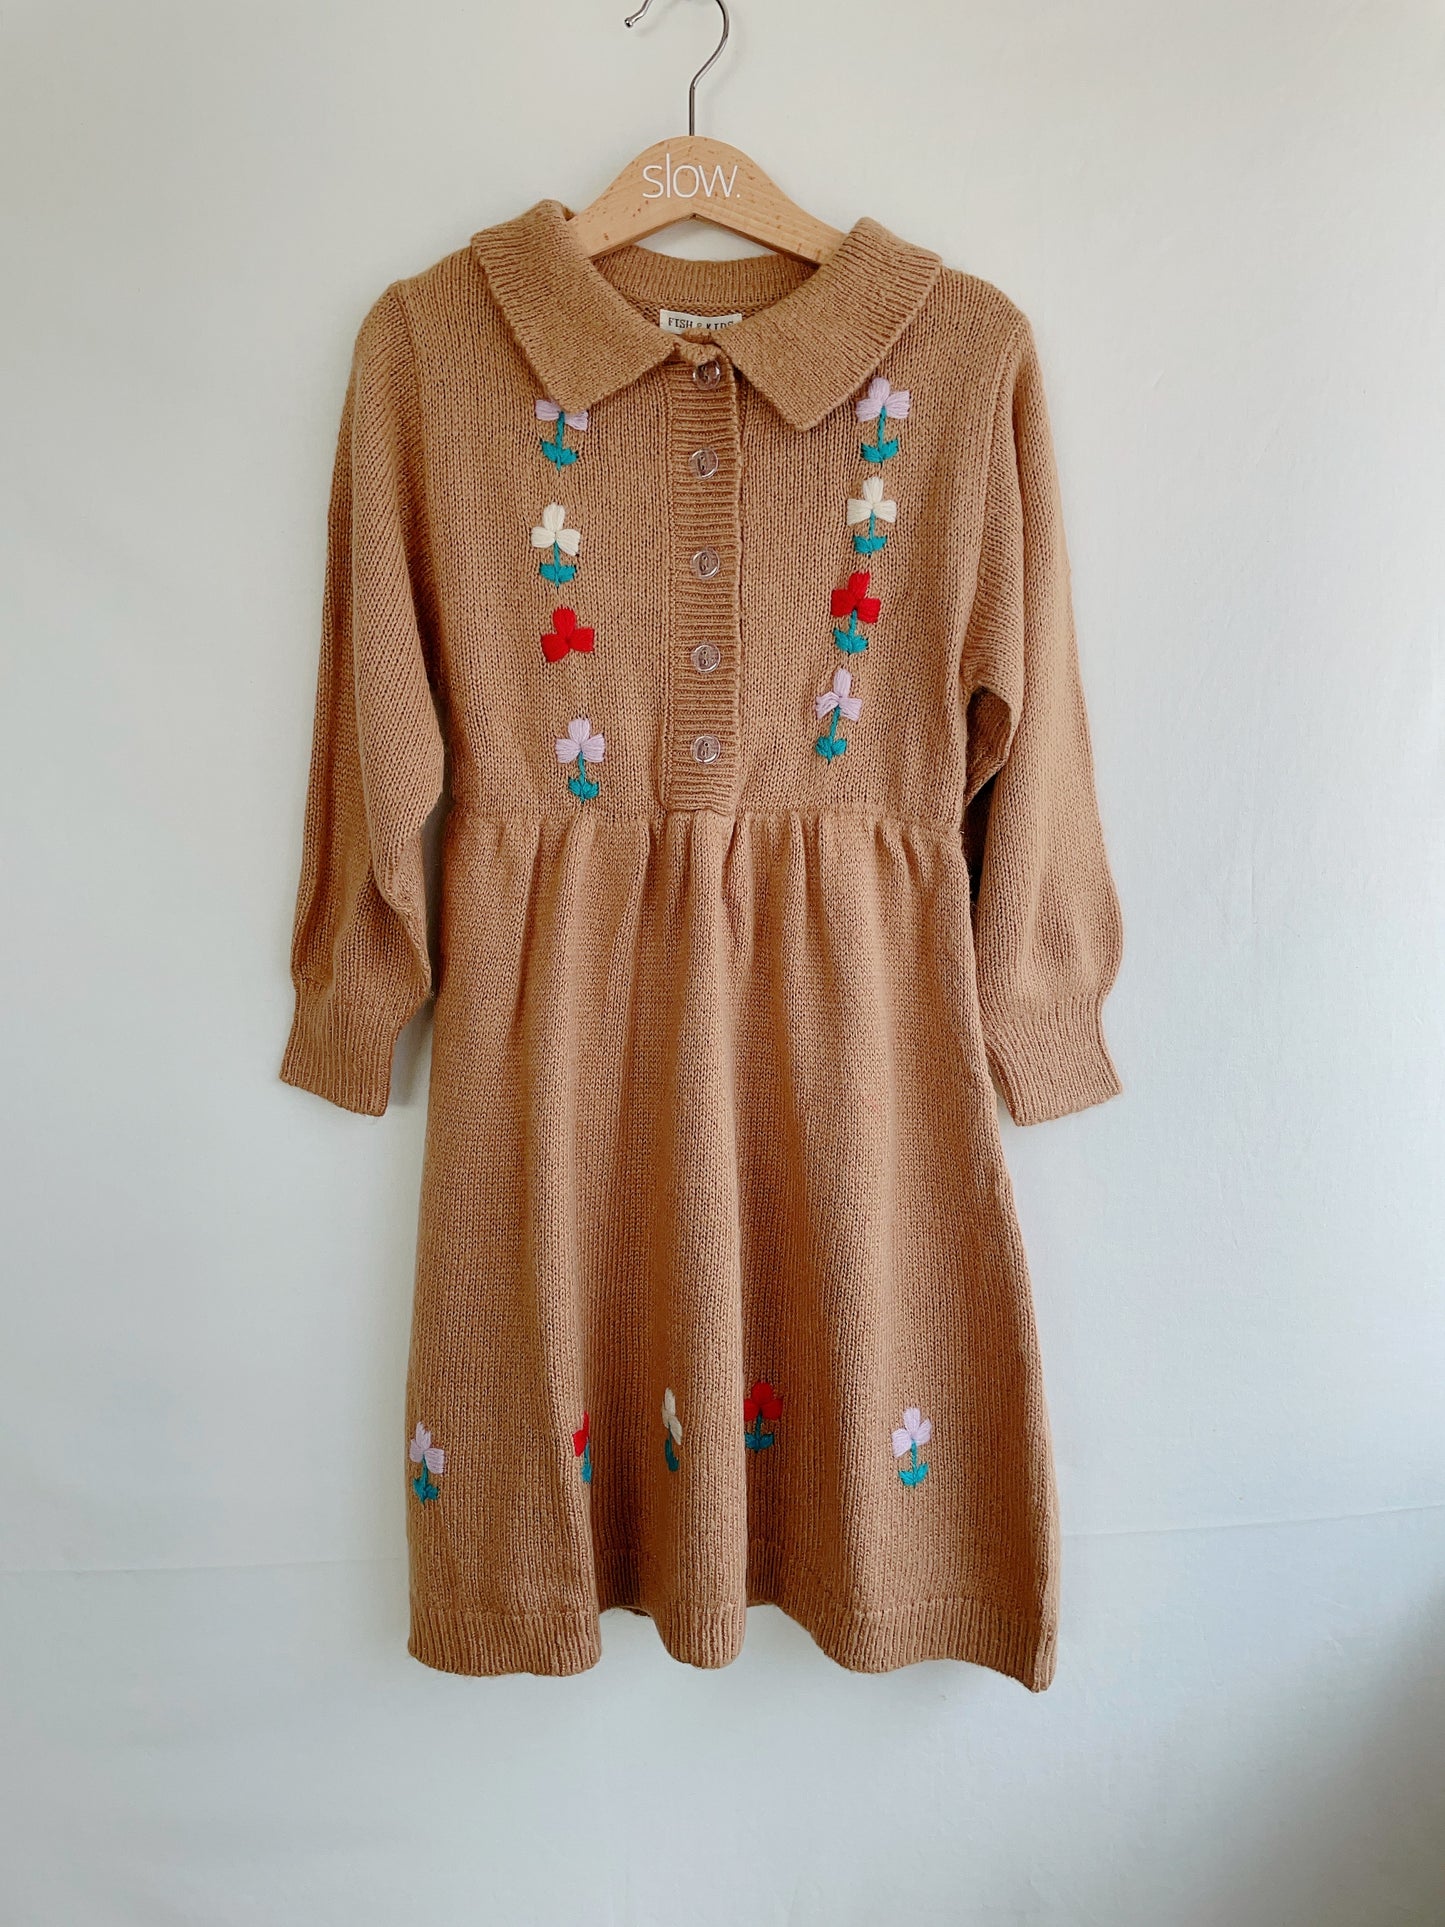 +FISH & KIDS+ Camel Dress with Embroidered Flowers and Buttons